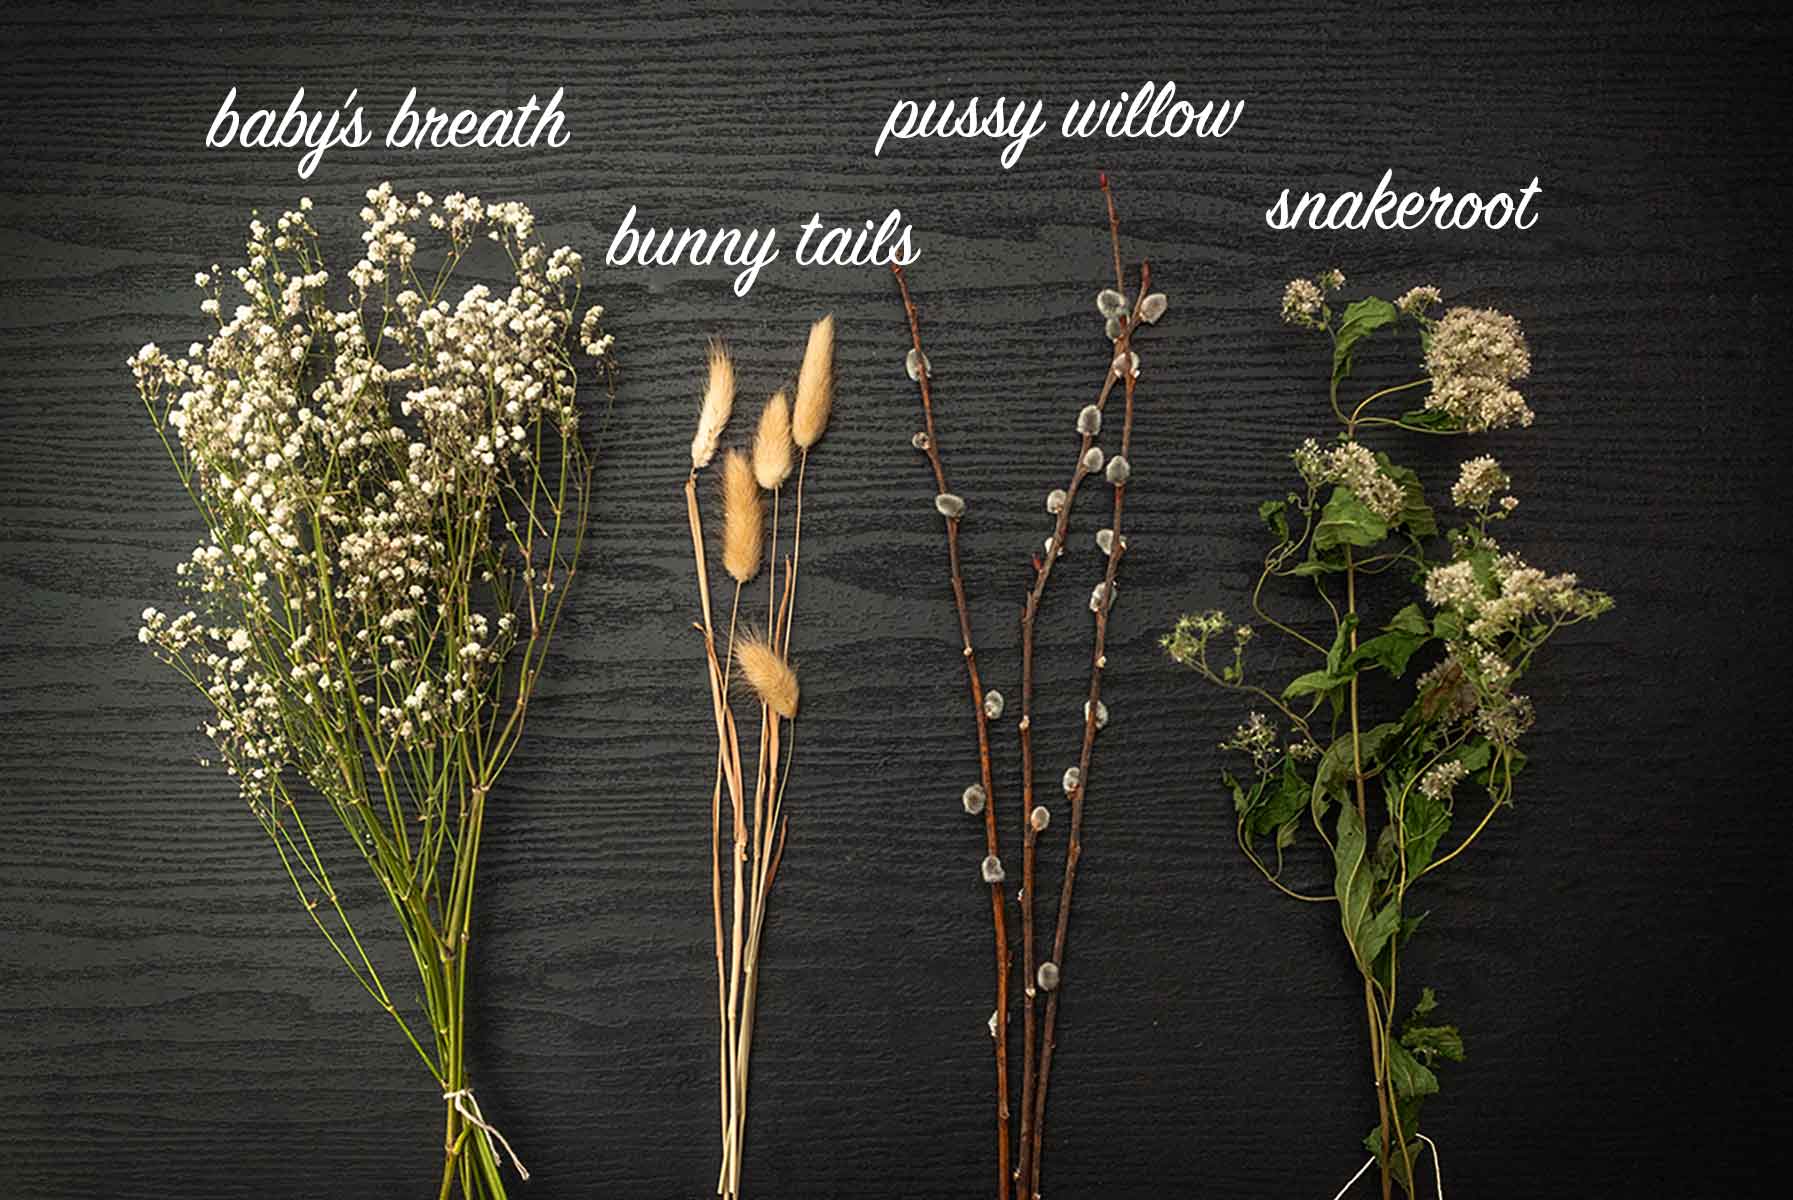 Baby's breath, bunny tails, pussy willows and snakeroot on a table with labels describing what they are.